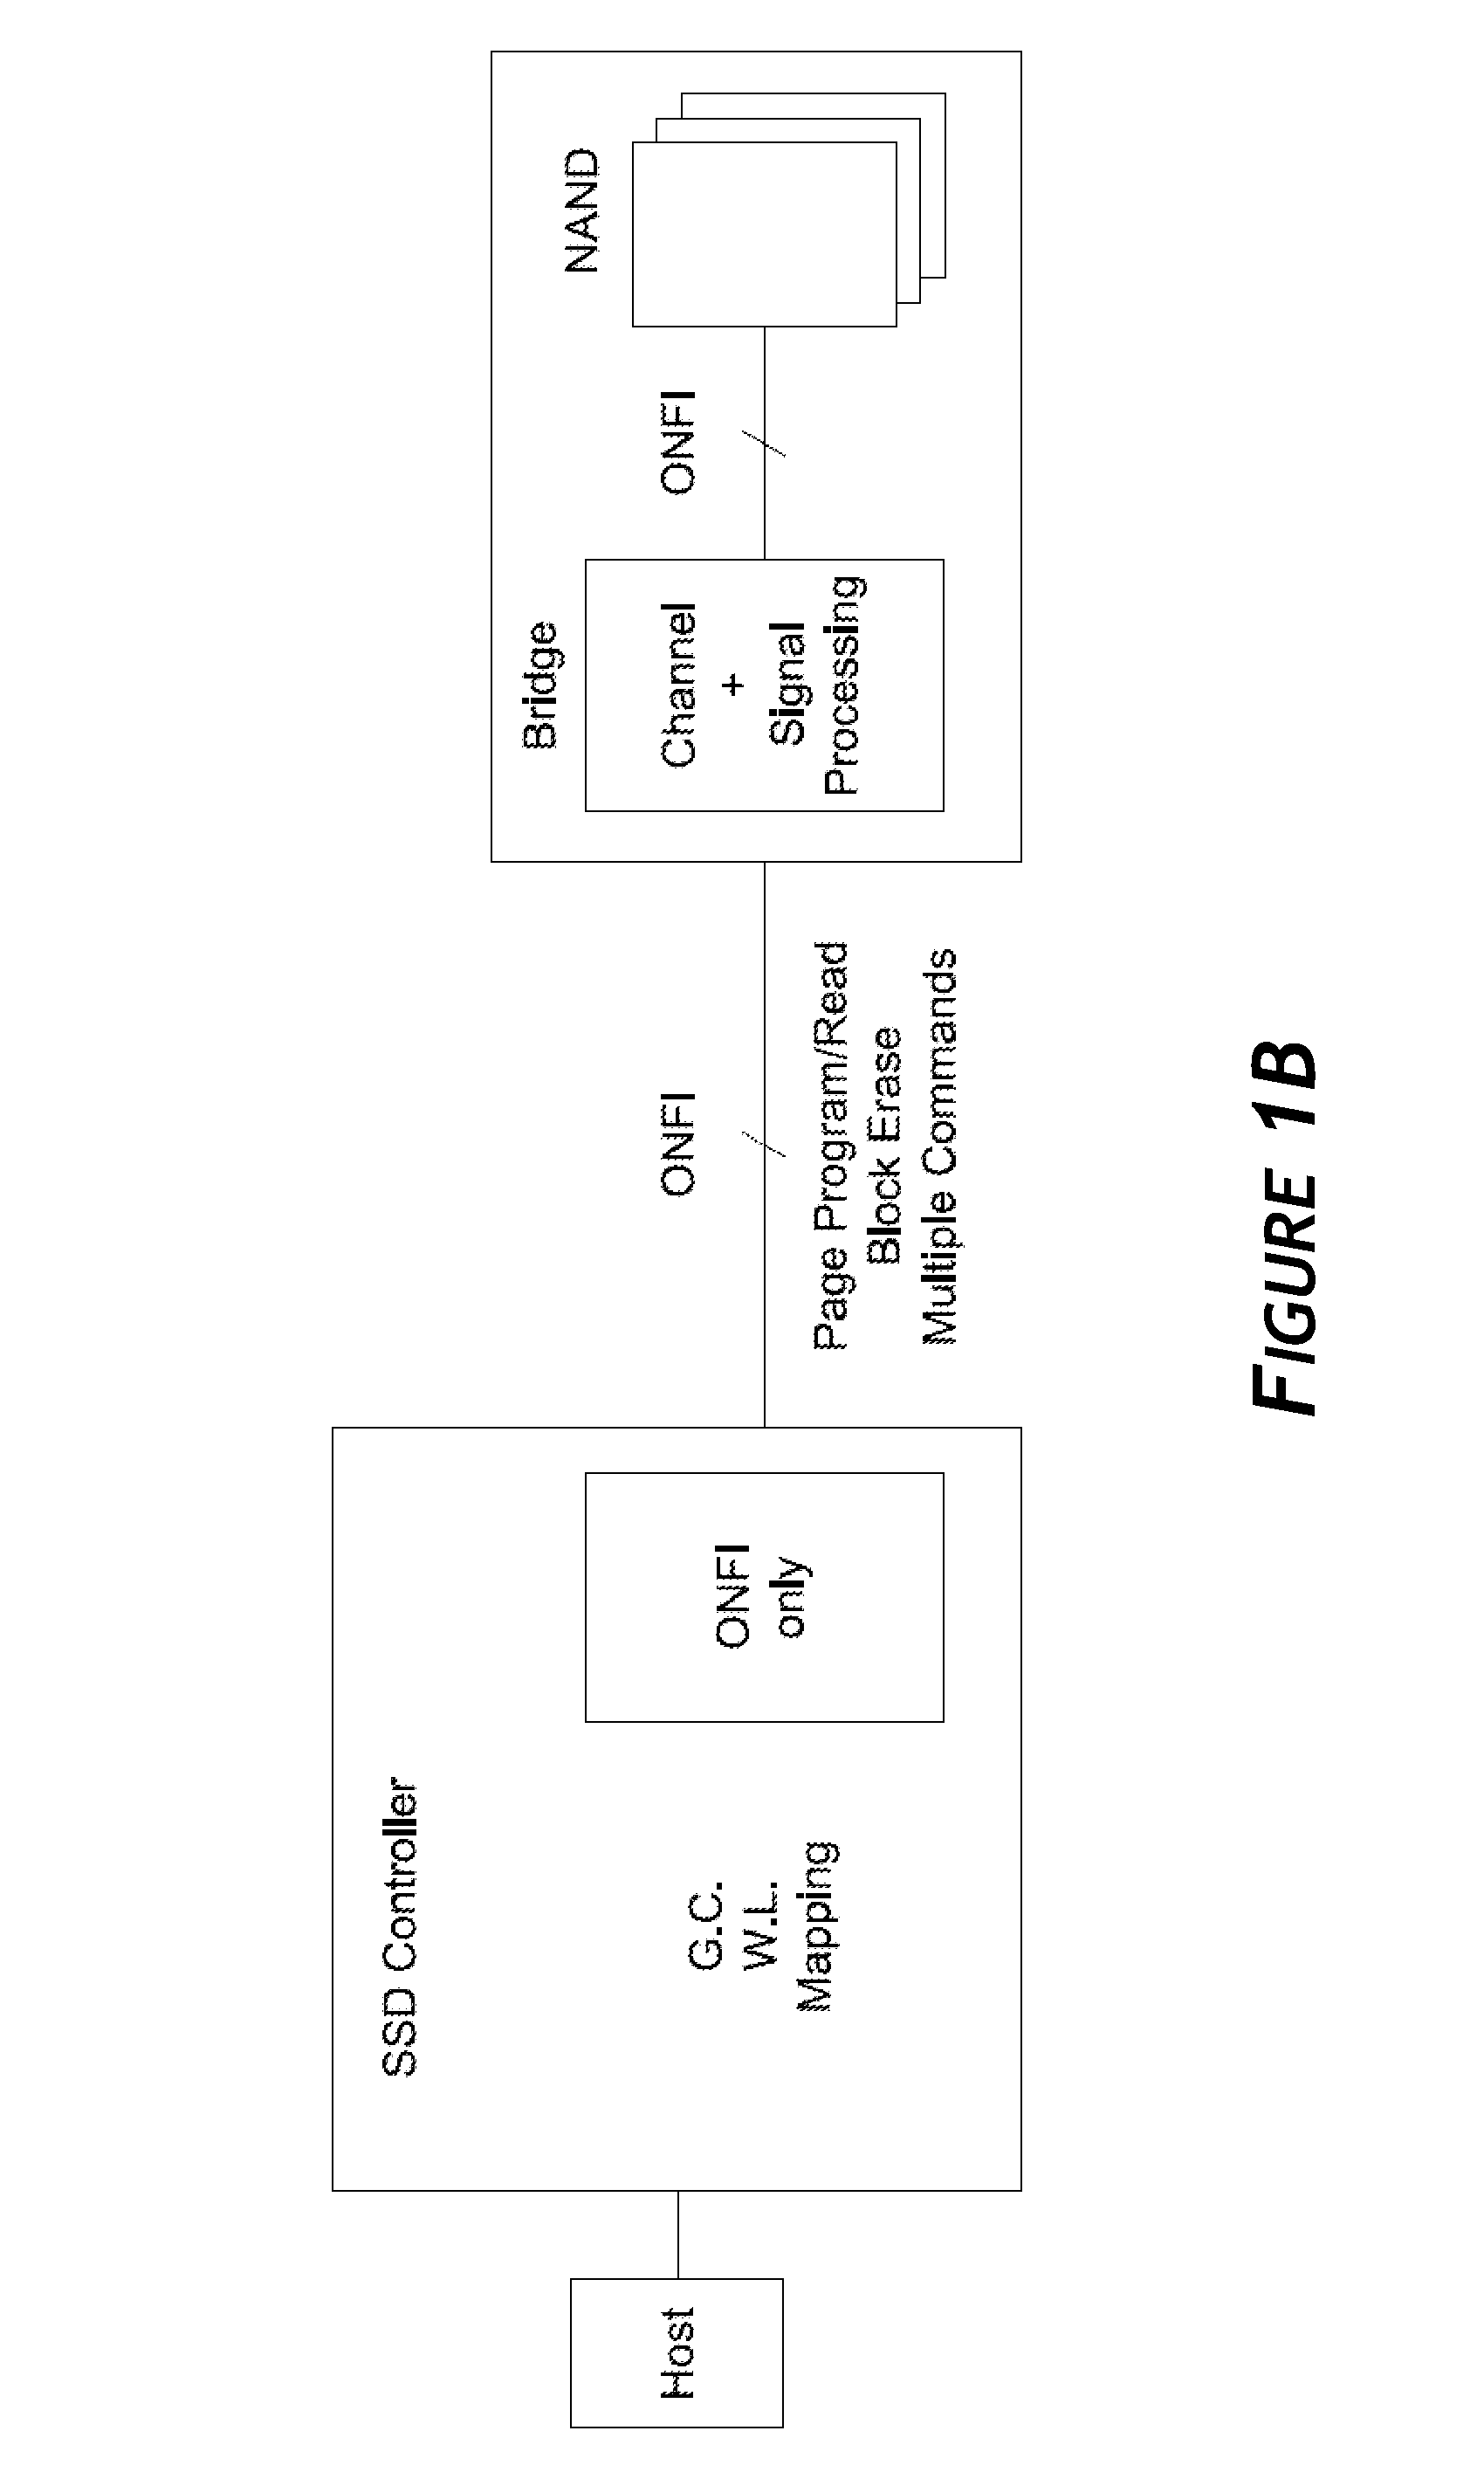 Systems and methods for providing inline parameter service in data storage devices